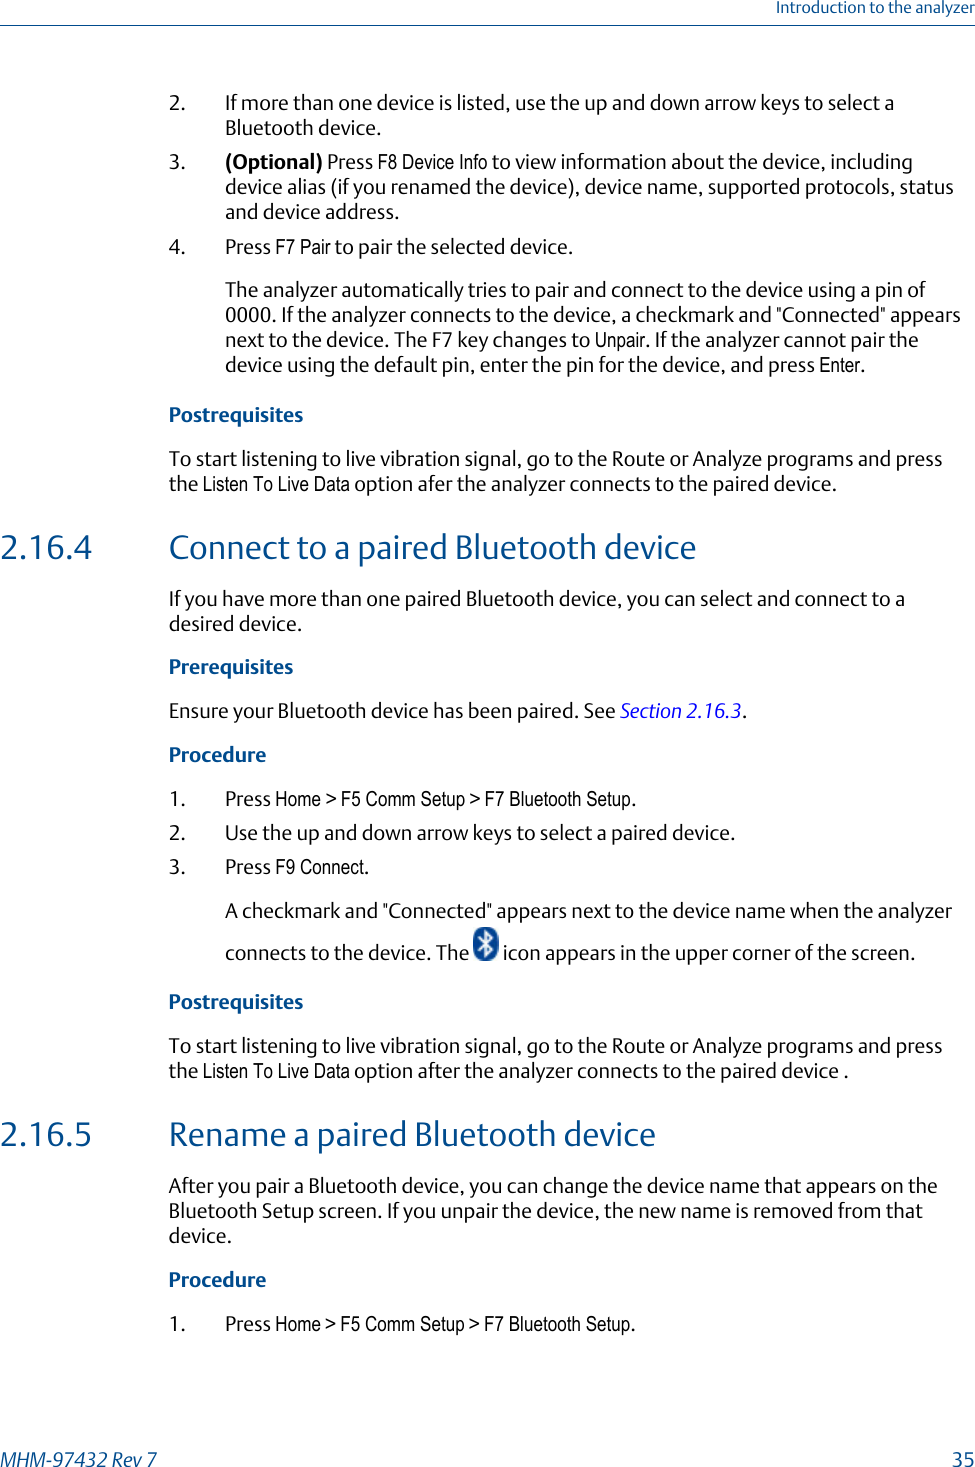 2. If more than one device is listed, use the up and down arrow keys to select aBluetooth device.3. (Optional) Press F8 Device Info to view information about the device, includingdevice alias (if you renamed the device), device name, supported protocols, statusand device address.4. Press F7 Pair to pair the selected device.The analyzer automatically tries to pair and connect to the device using a pin of0000. If the analyzer connects to the device, a checkmark and &quot;Connected&quot; appearsnext to the device. The F7 key changes to Unpair. If the analyzer cannot pair thedevice using the default pin, enter the pin for the device, and press Enter.PostrequisitesTo start listening to live vibration signal, go to the Route or Analyze programs and pressthe Listen To Live Data option afer the analyzer connects to the paired device.2.16.4 Connect to a paired Bluetooth deviceIf you have more than one paired Bluetooth device, you can select and connect to adesired device.PrerequisitesEnsure your Bluetooth device has been paired. See Section 2.16.3.Procedure1. Press Home &gt; F5 Comm Setup &gt; F7 Bluetooth Setup.2. Use the up and down arrow keys to select a paired device.3. Press F9 Connect.A checkmark and &quot;Connected&quot; appears next to the device name when the analyzerconnects to the device. The   icon appears in the upper corner of the screen.PostrequisitesTo start listening to live vibration signal, go to the Route or Analyze programs and pressthe Listen To Live Data option after the analyzer connects to the paired device .2.16.5 Rename a paired Bluetooth deviceAfter you pair a Bluetooth device, you can change the device name that appears on theBluetooth Setup screen. If you unpair the device, the new name is removed from thatdevice.Procedure1. Press Home &gt; F5 Comm Setup &gt; F7 Bluetooth Setup.Introduction to the analyzerMHM-97432 Rev 7  35